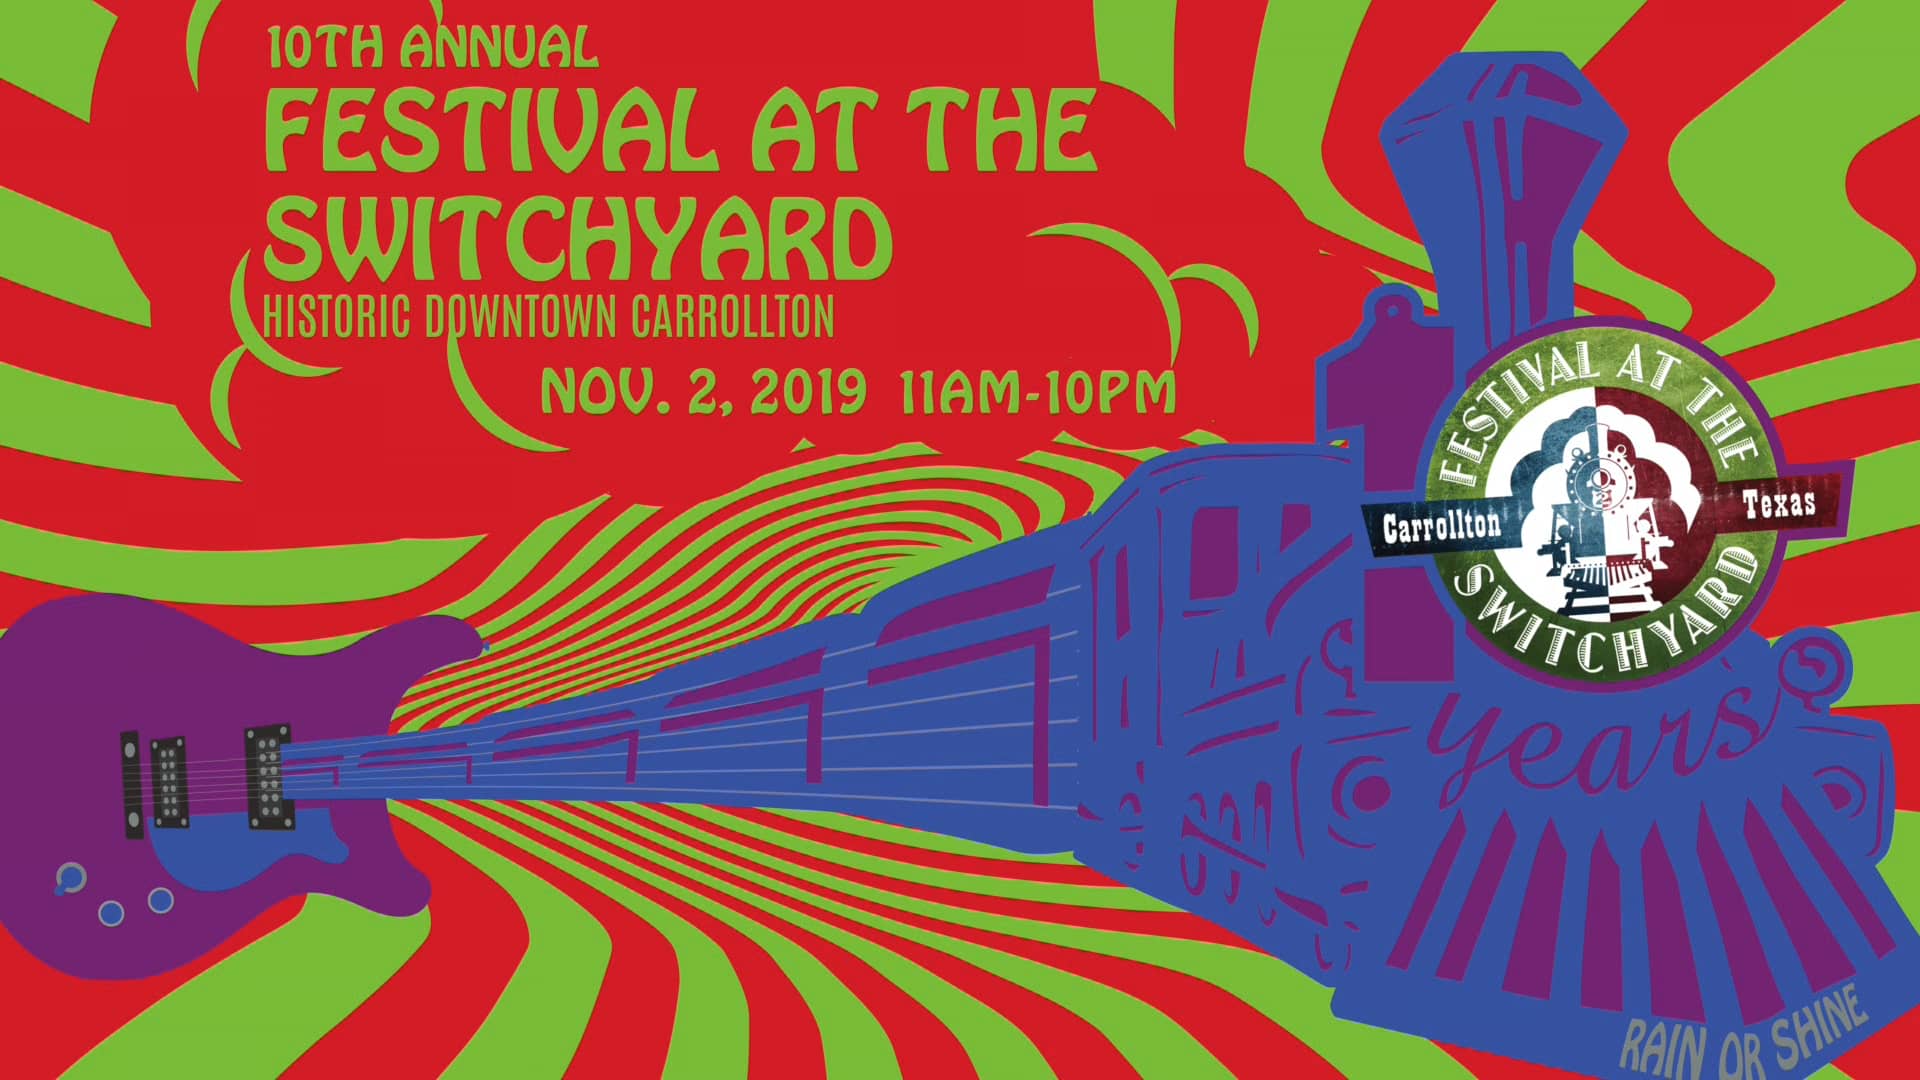 Carrollton Festival at the Switchyard 2019 on Vimeo